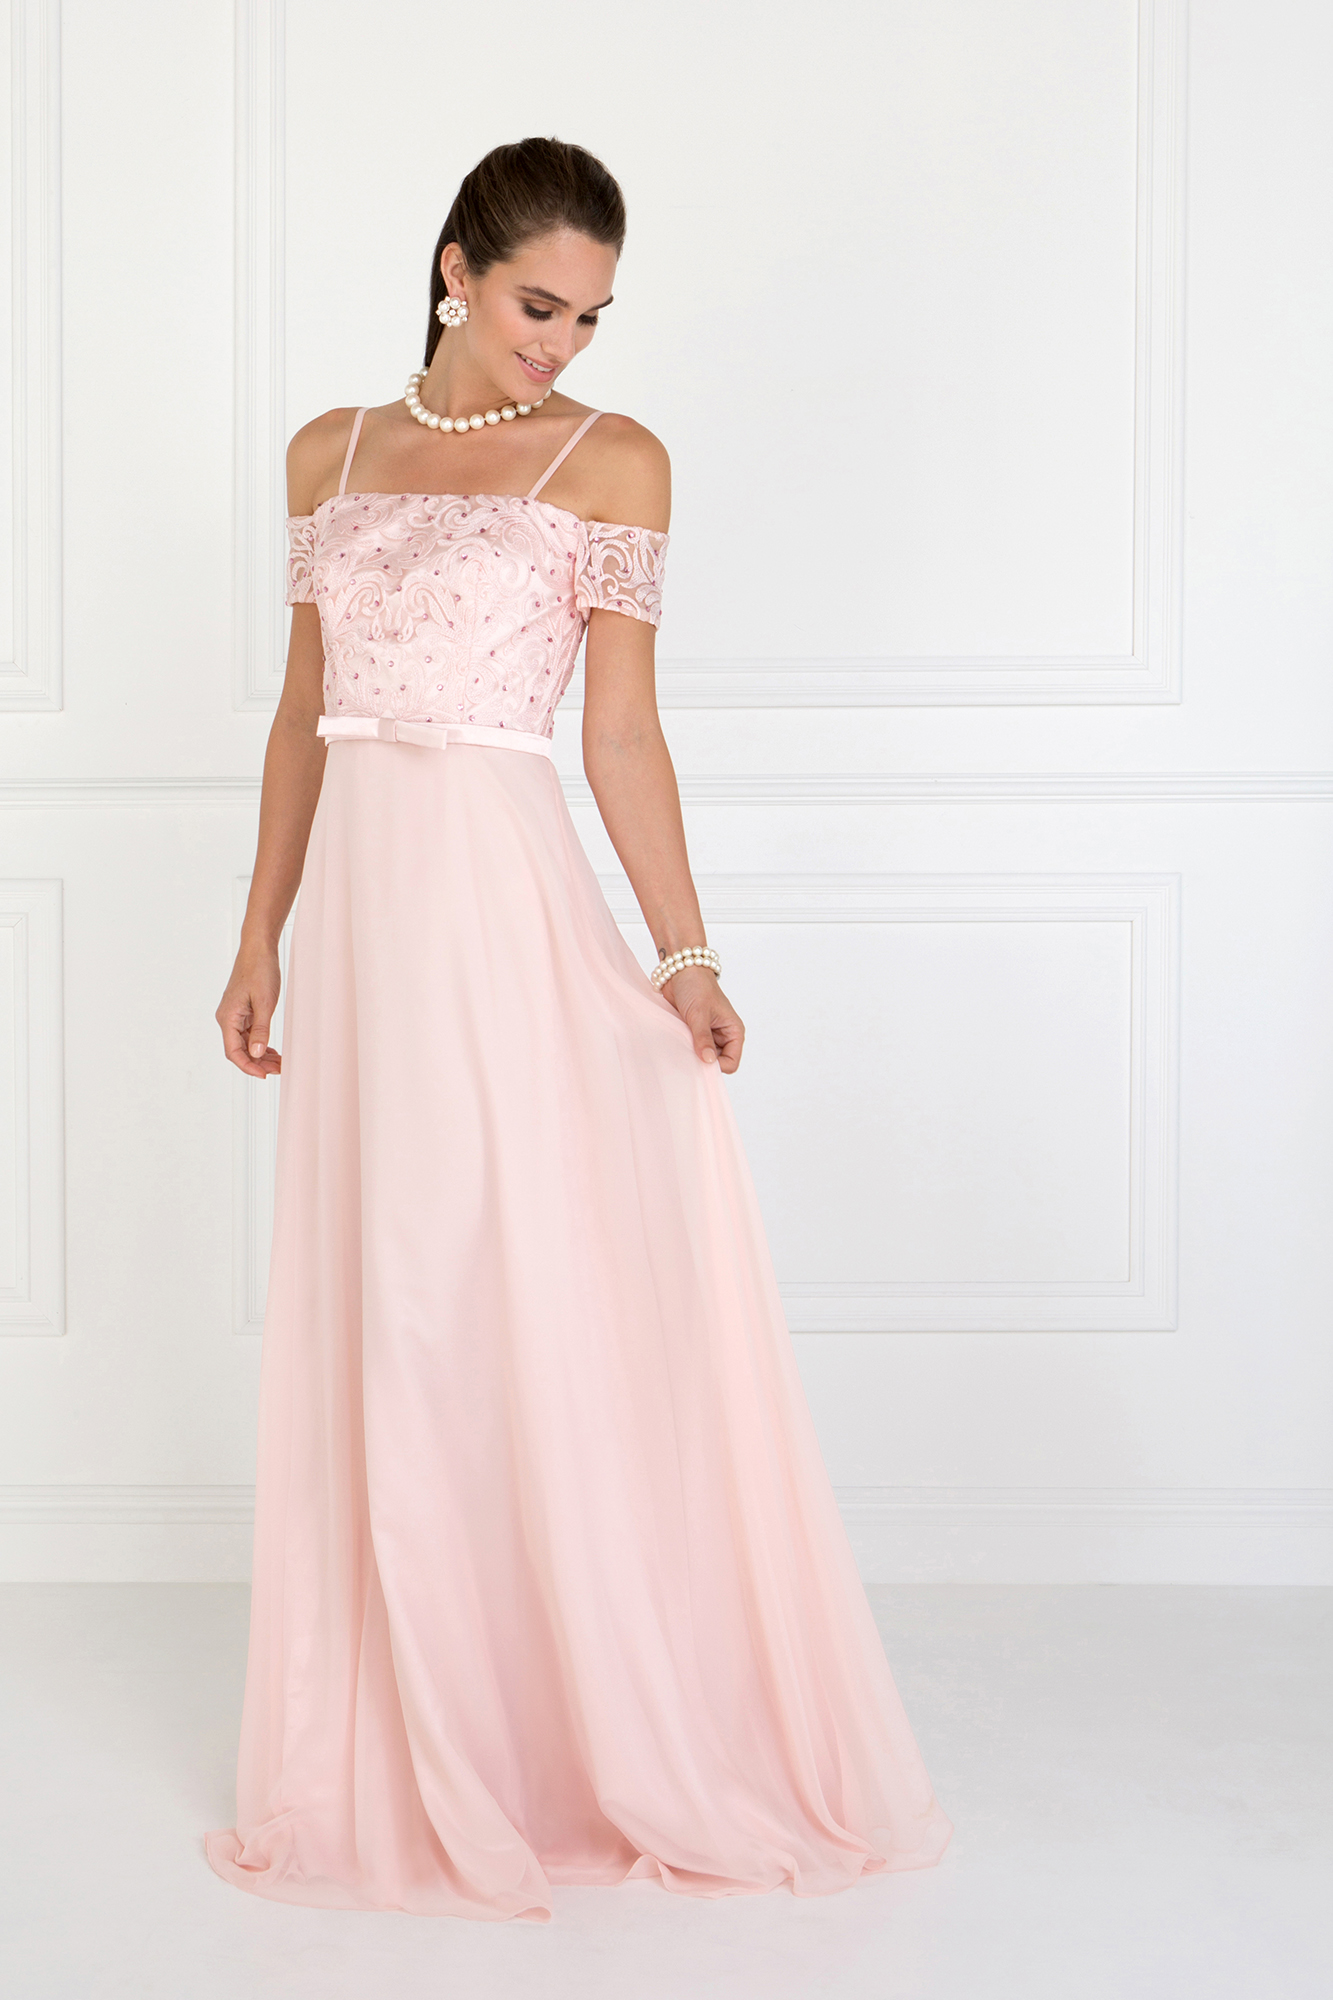 woman in blush pink gown